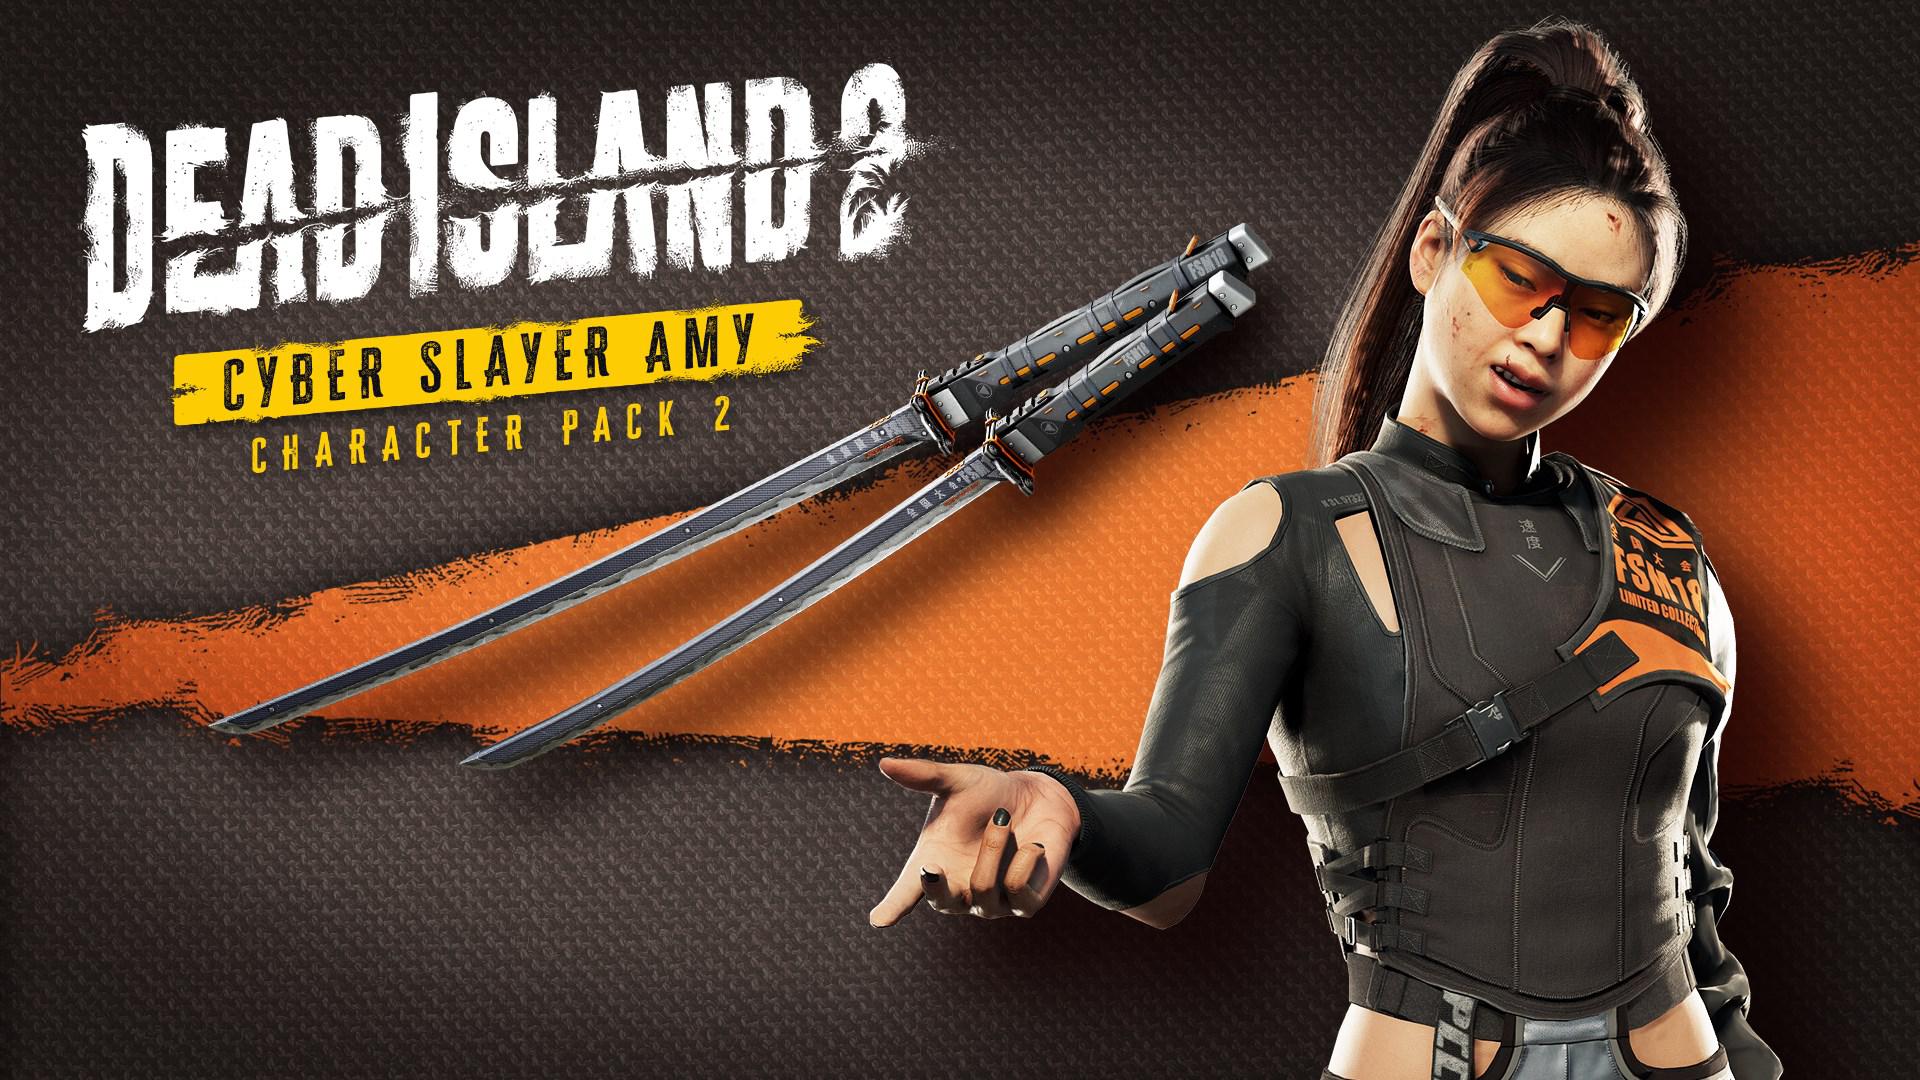 Dead Island 2 - Character Pack 2 - Cyber Slayer Amy DLC US Xbox Series X|S CD Key 25.98 USD